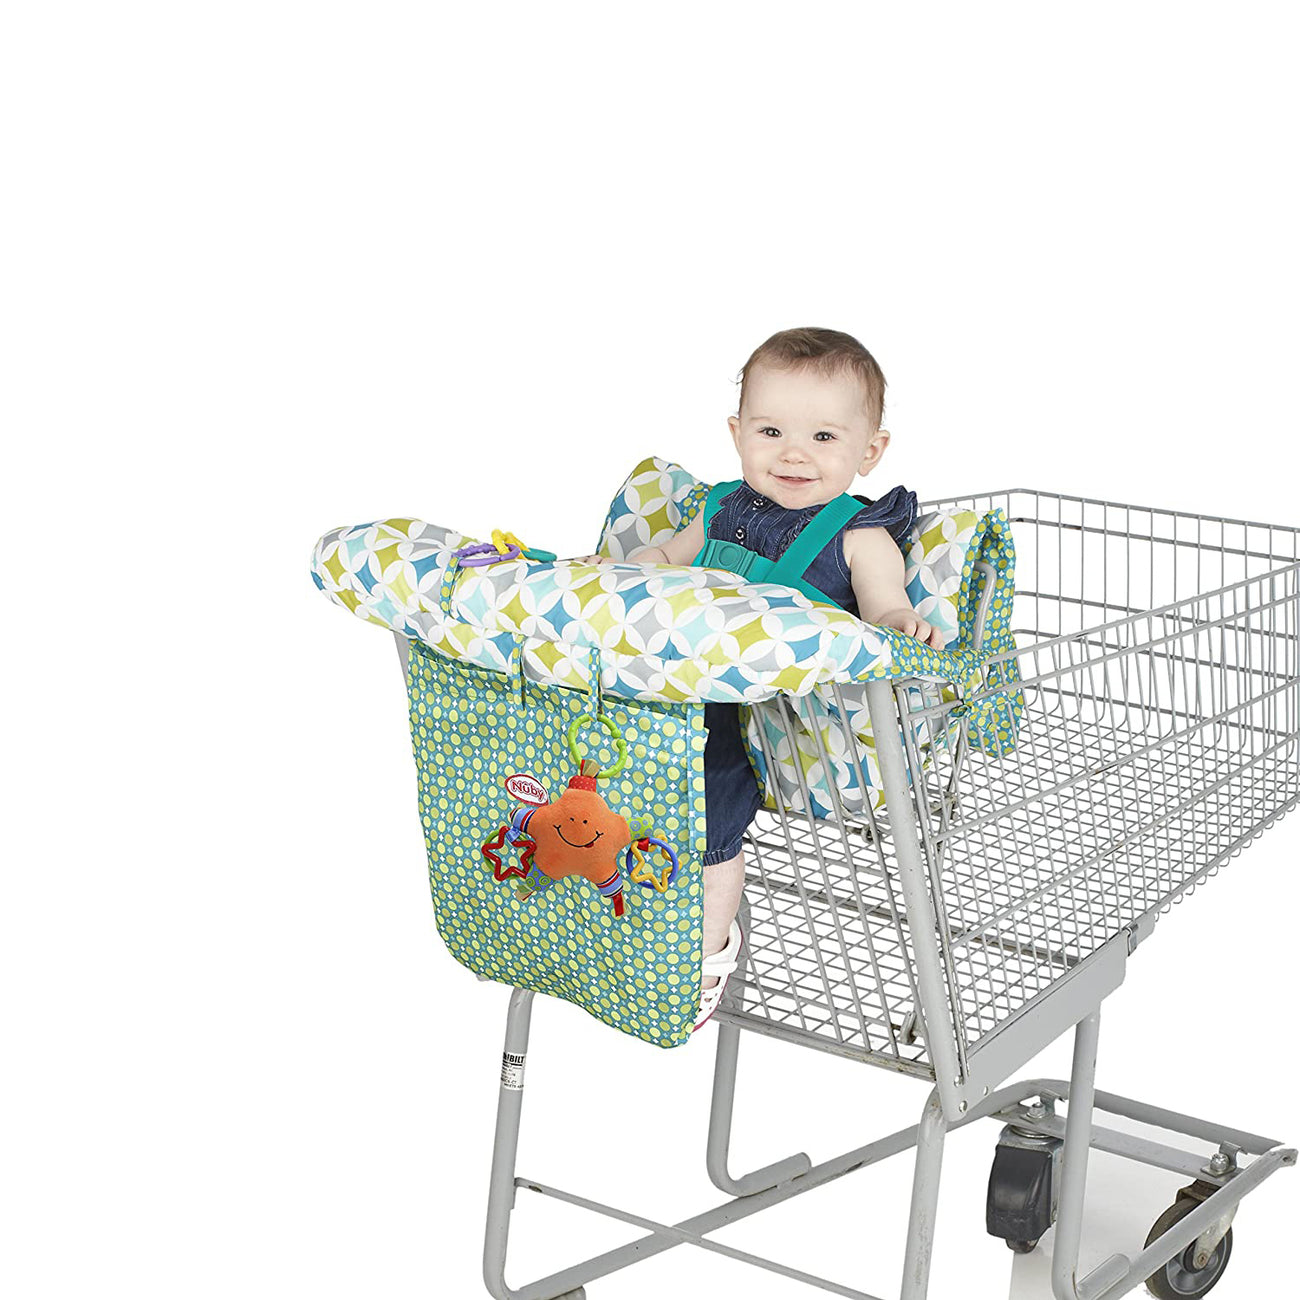 2-in-1 Universal Size Shopping Cart & High Chair Cover - Nuby US